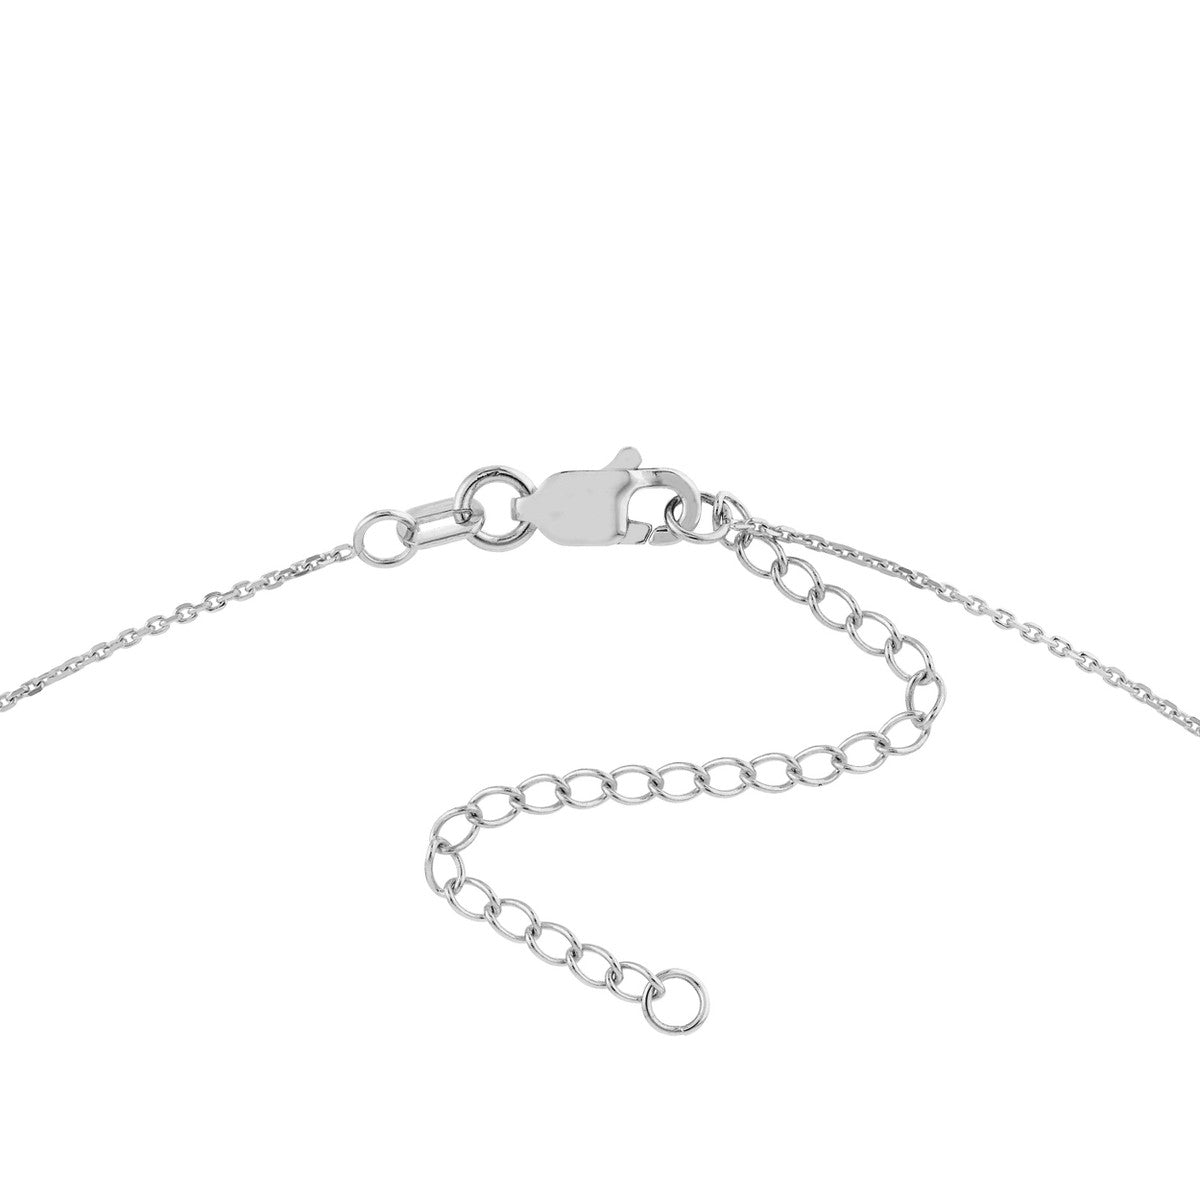 Plated Sterling Silver Bar Necklace with Cross